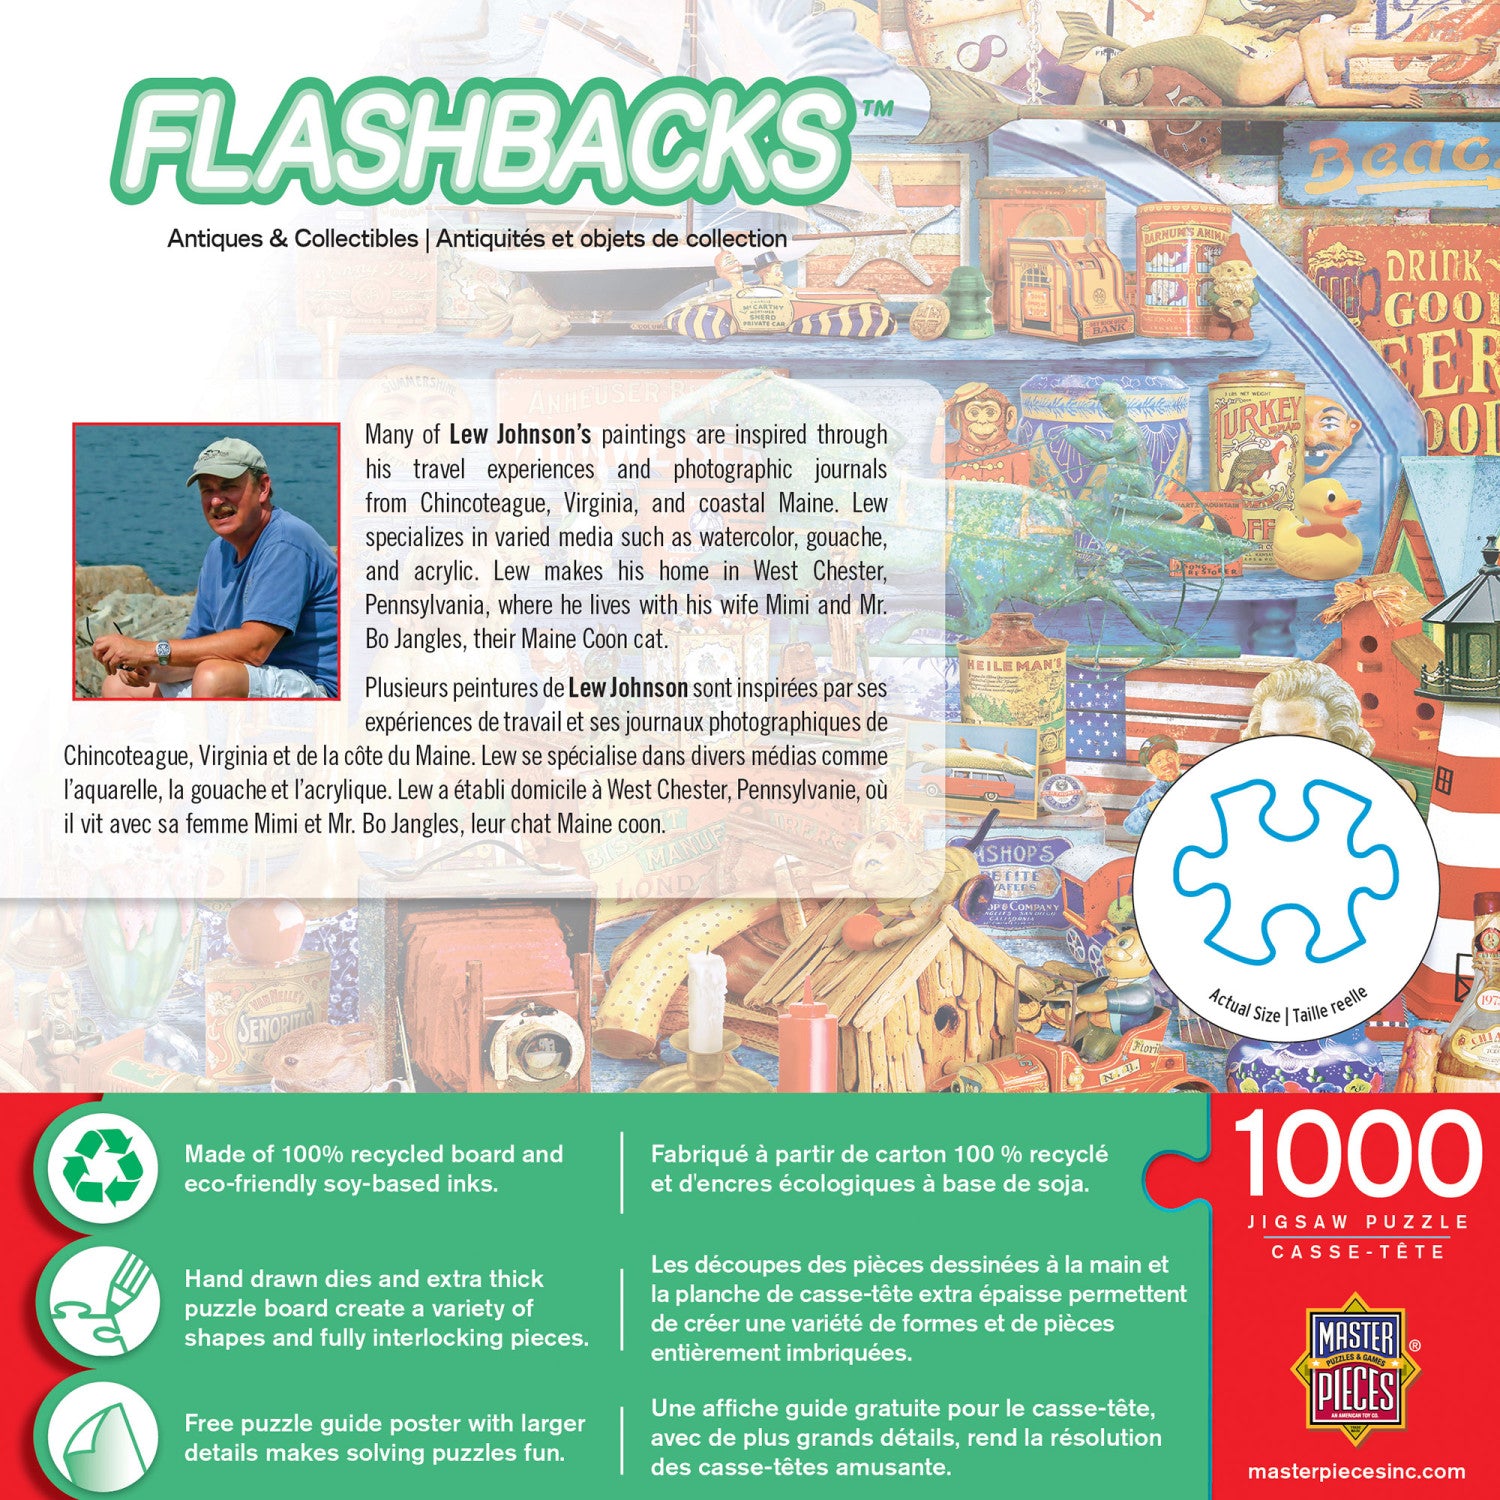 Flashbacks - Antiques & Collectibles 1000 Piece Jigsaw Puzzle